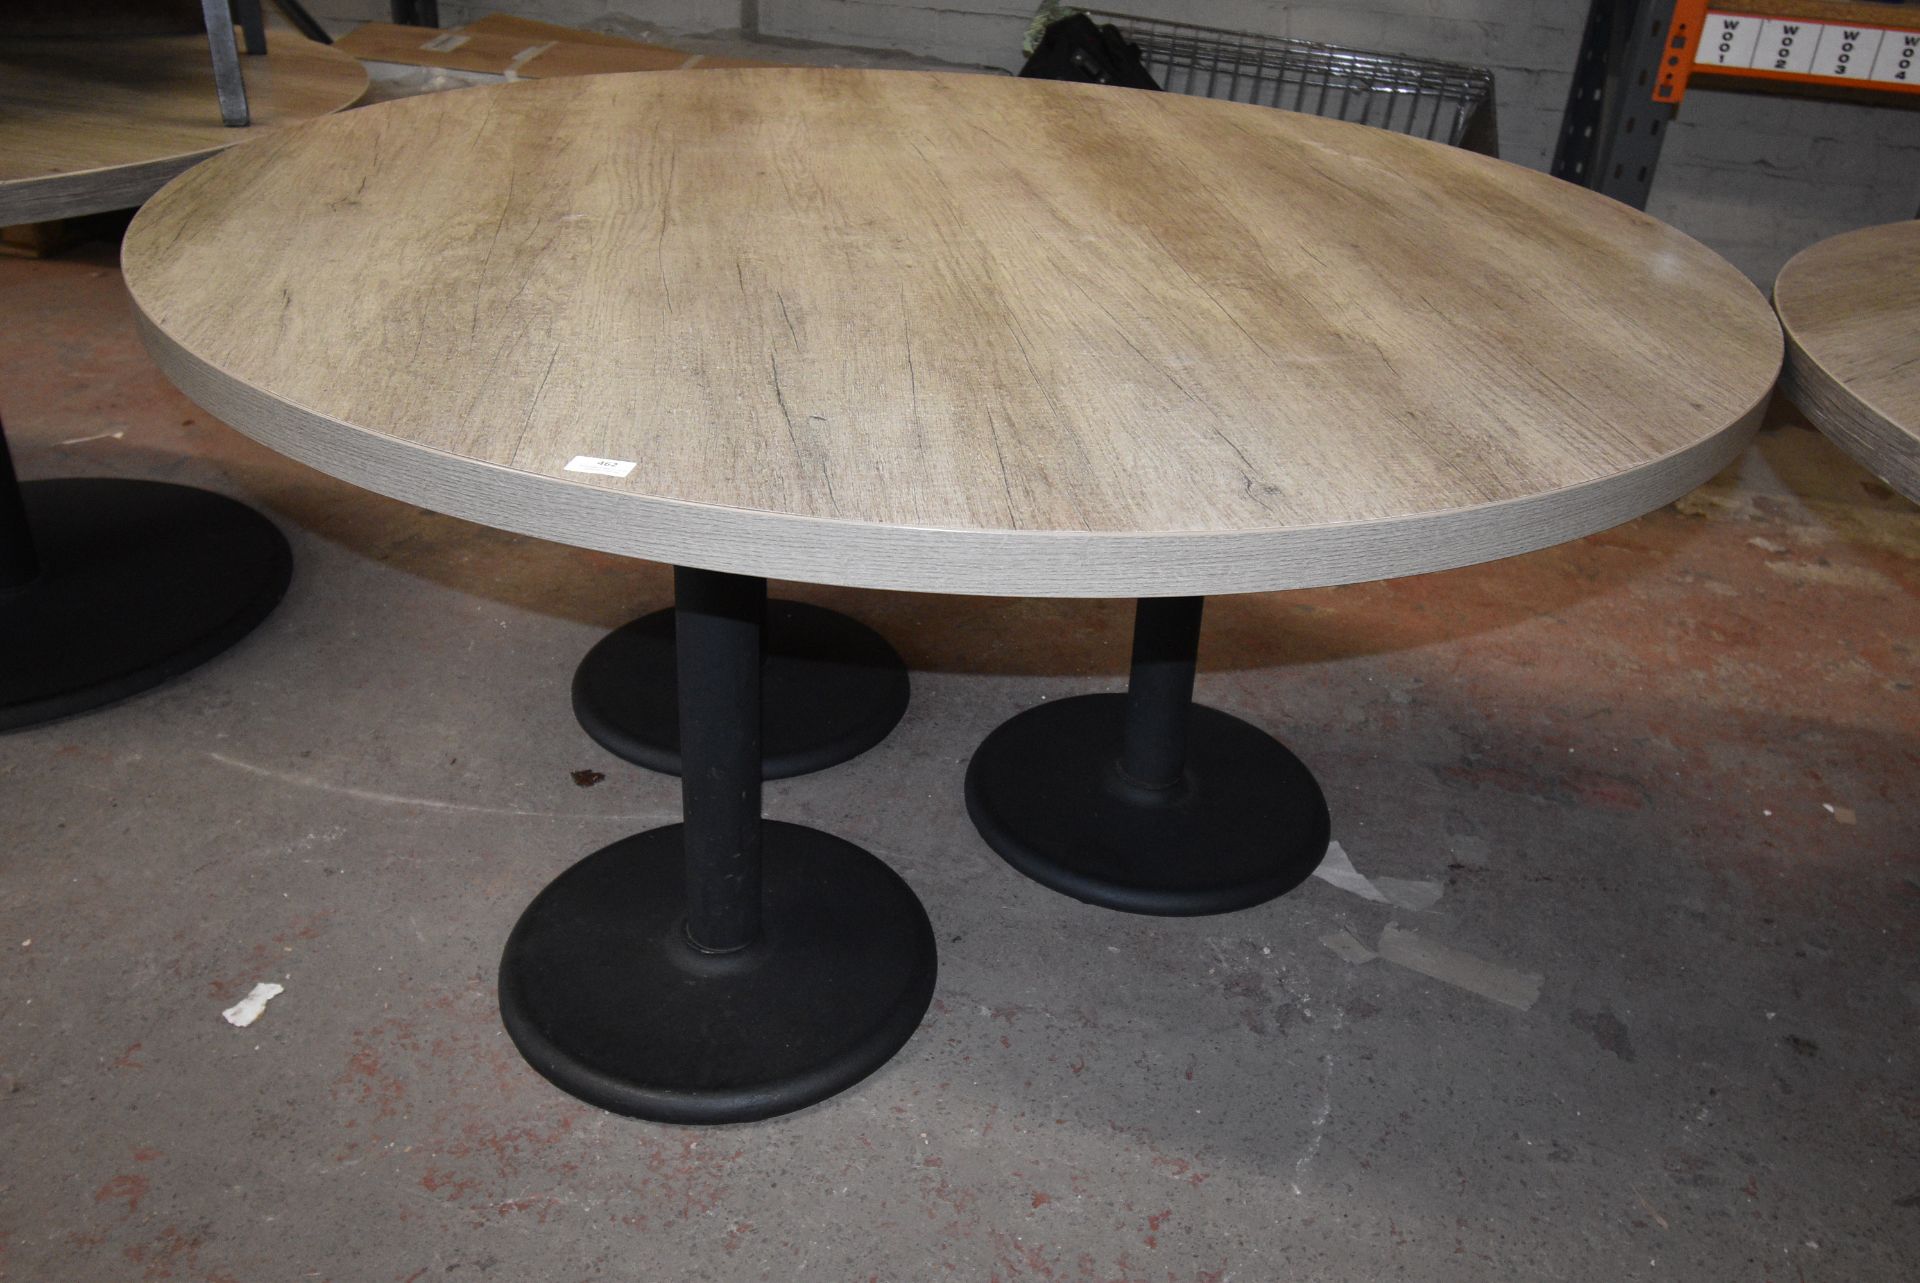 120cm Circular Single Pedestal Table with Four Assorted Chairs